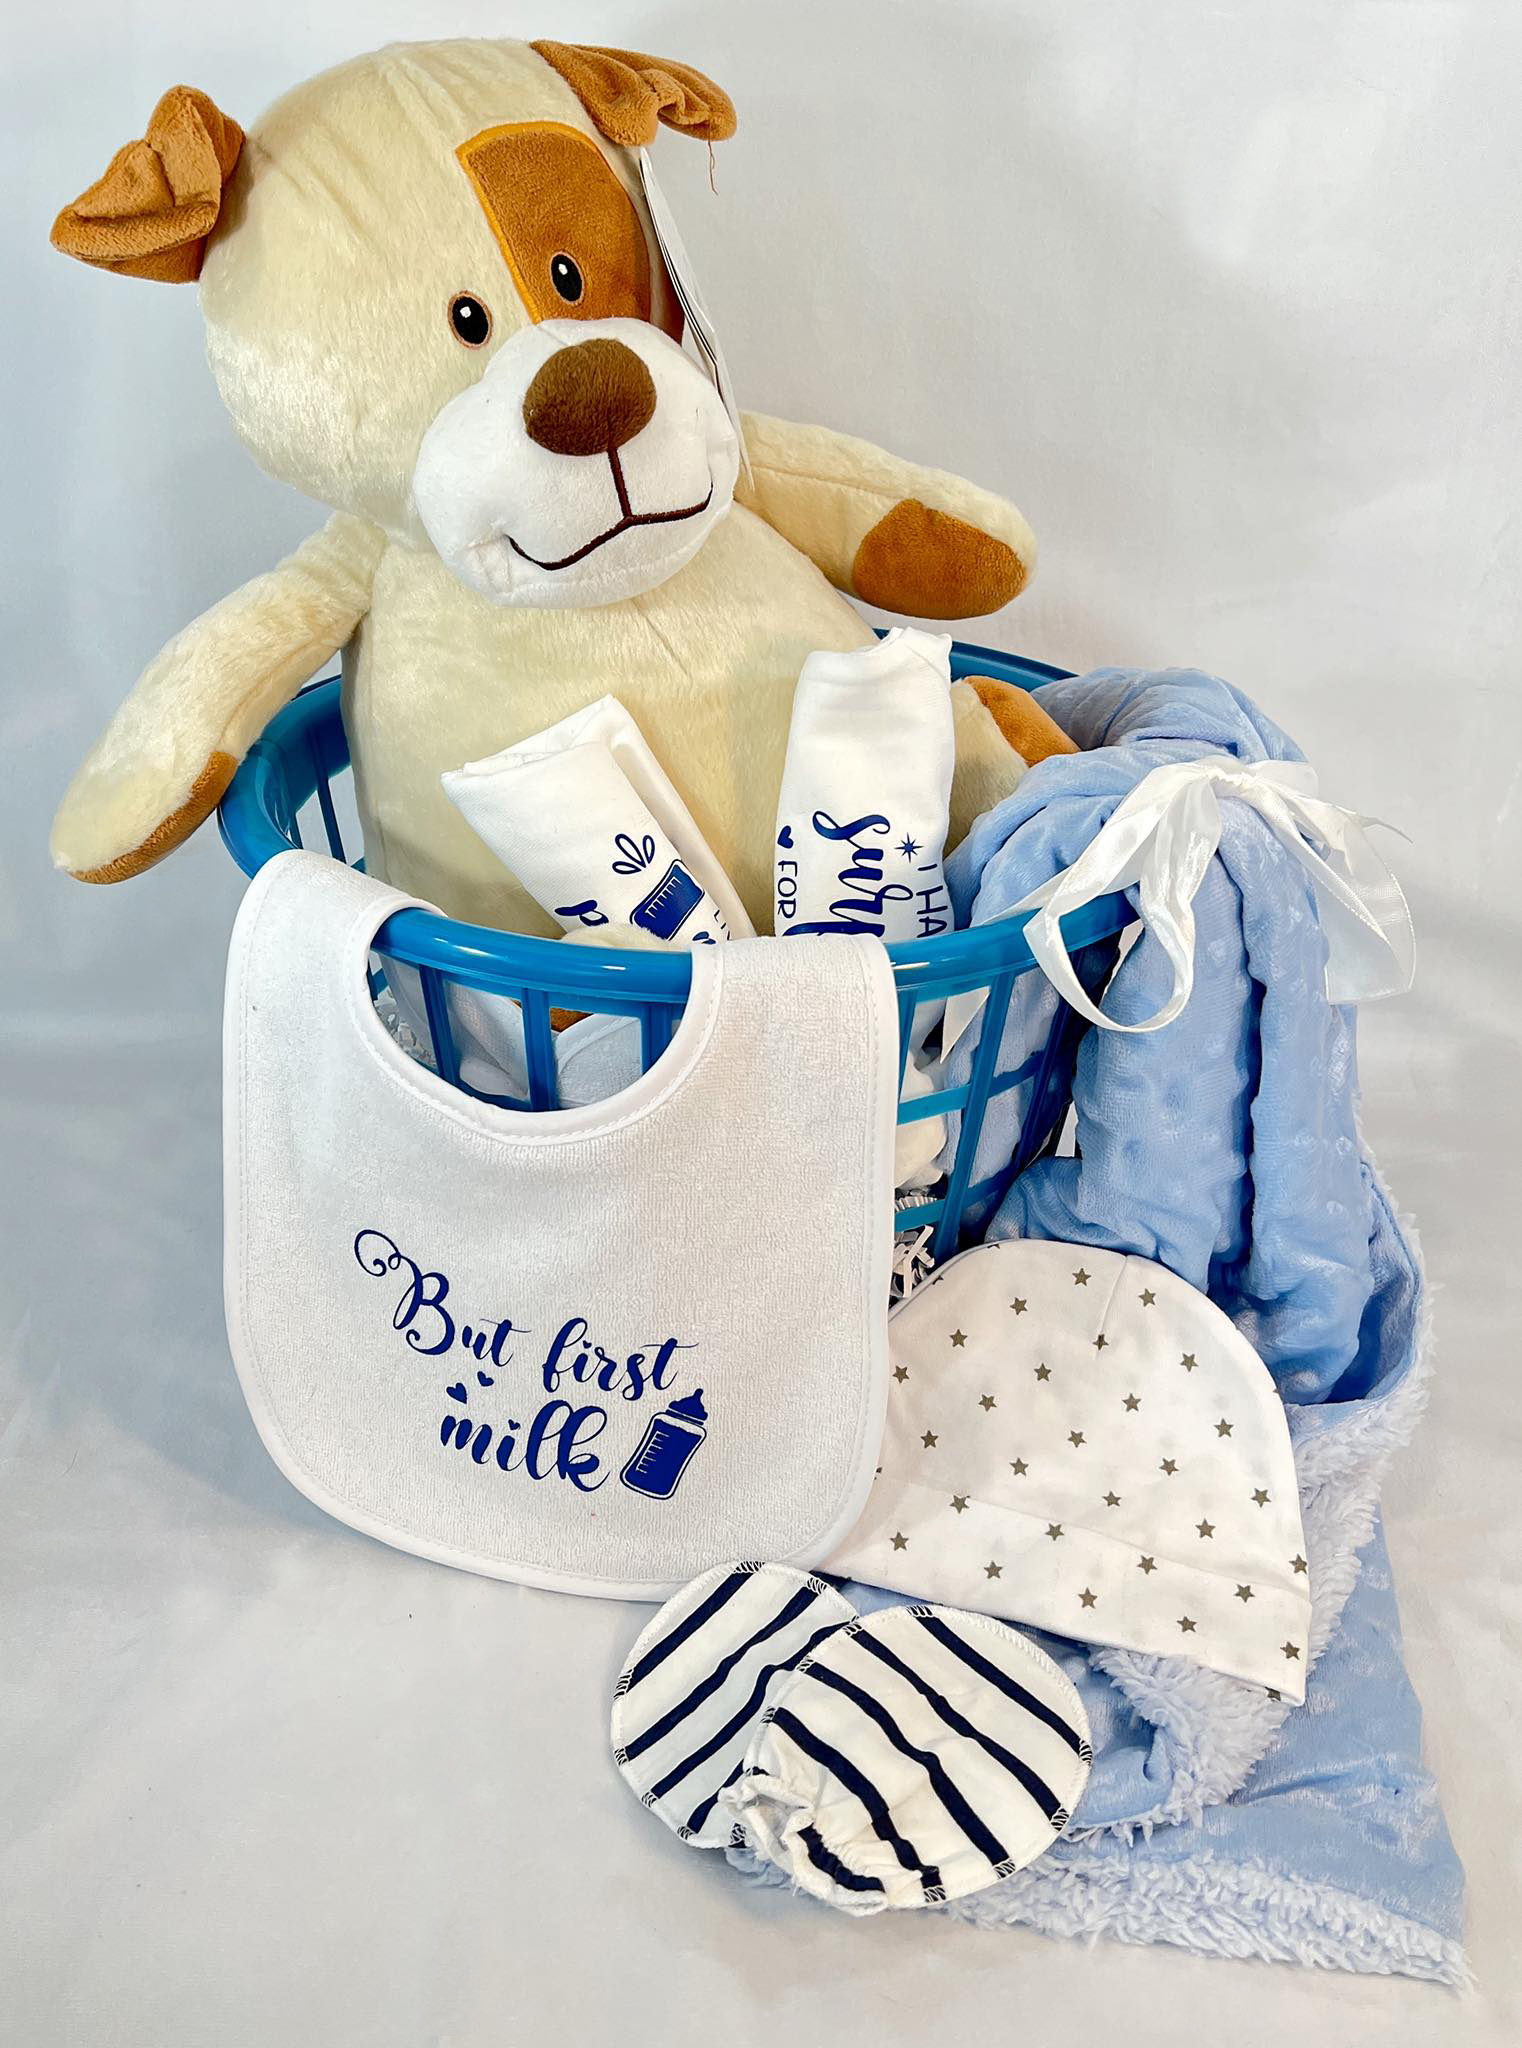 Edmonton Personalized Baby Gifts